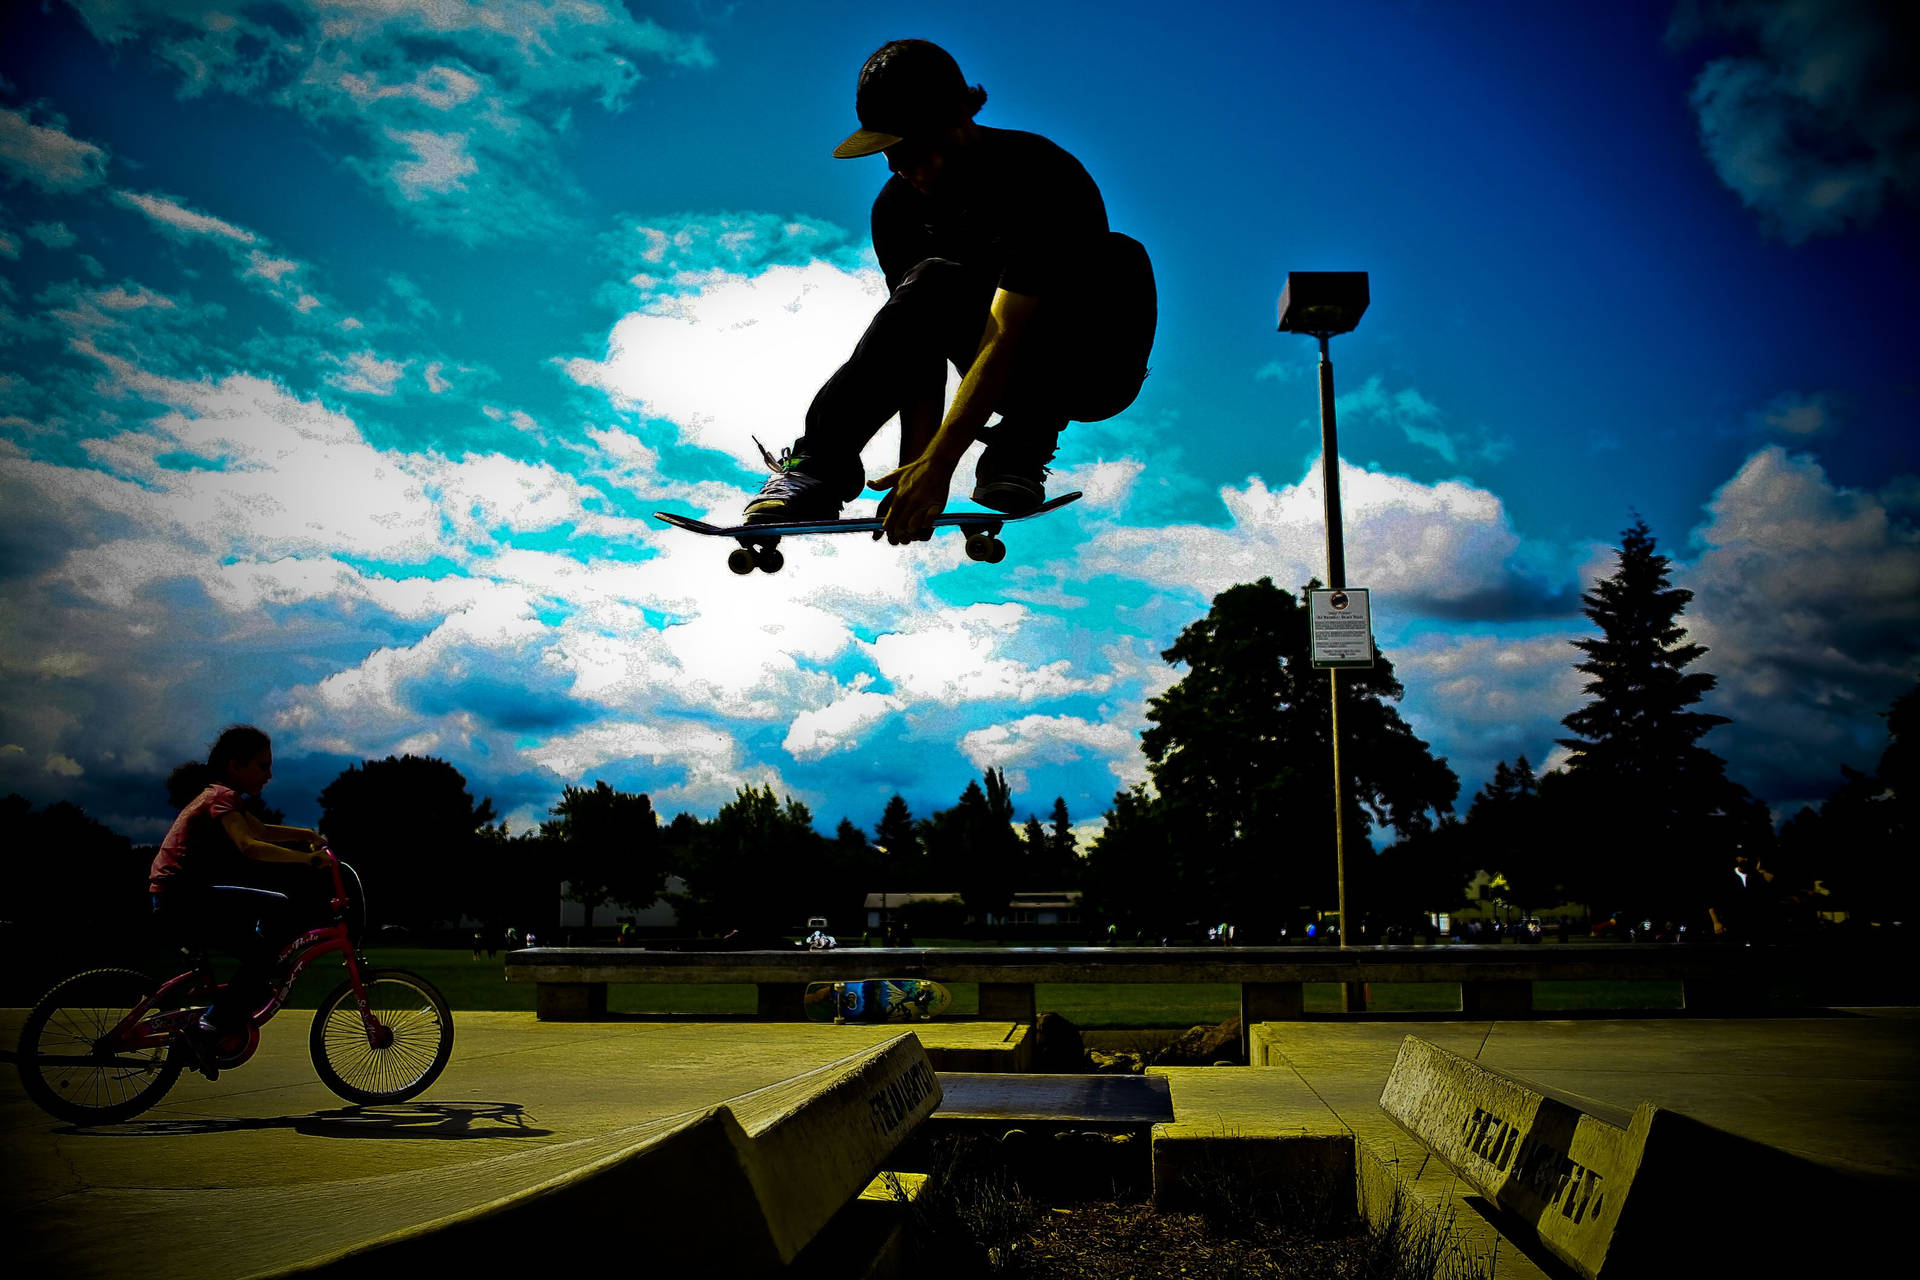 Skateboard enthusiast performing tricks in silhouette Wallpaper